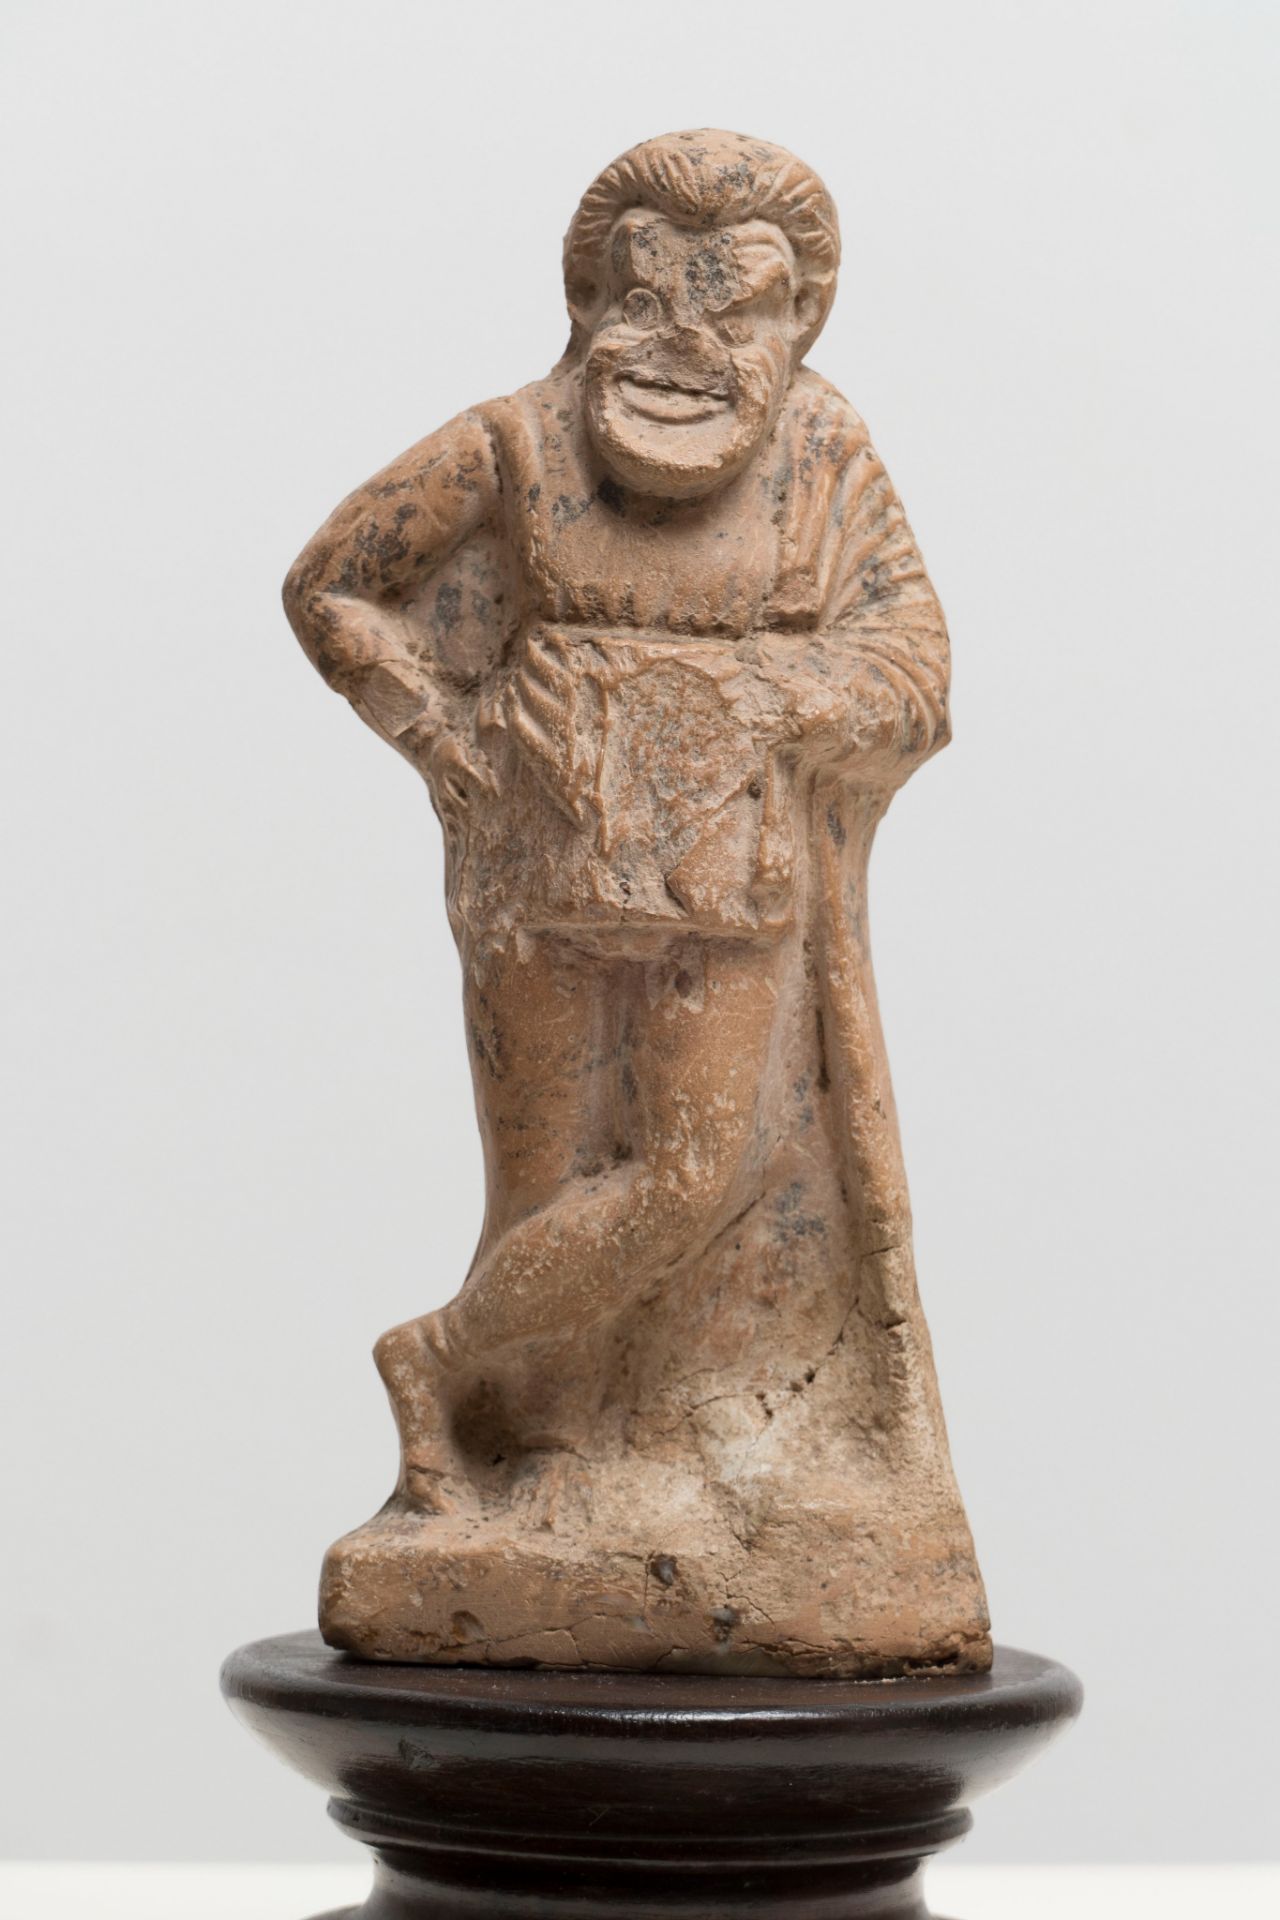 An antique terracotta figurine of a comic actor, Greece, ca. 350 B.C., H 15,2 cm - Image 3 of 7